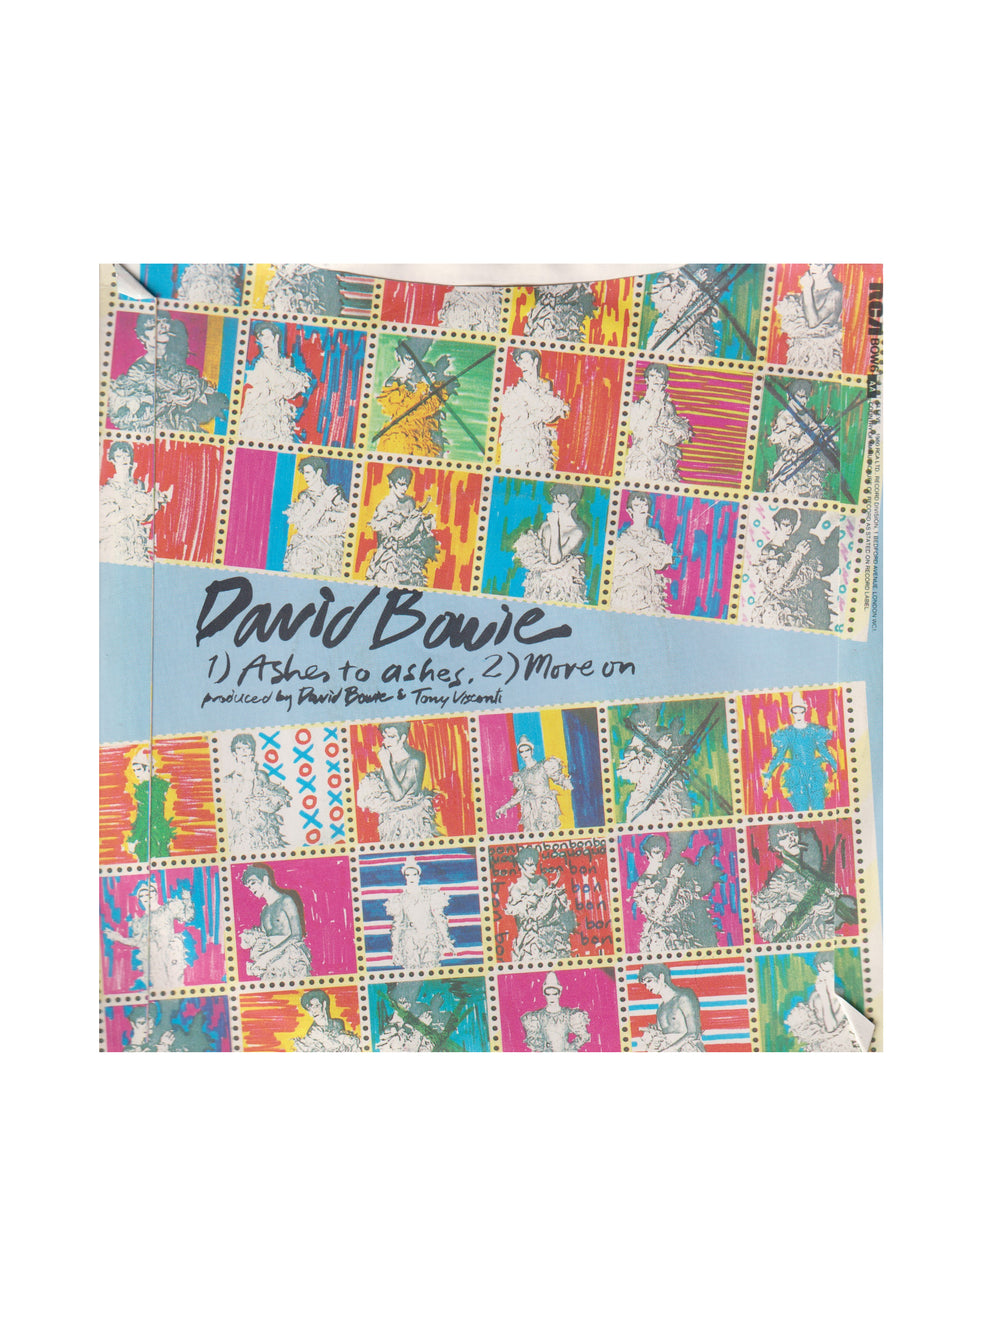 David Bowie ‎–  David Bowie - Ashes To Ashes Vinyl 7" With Stamps Single Preloved UK: 1980